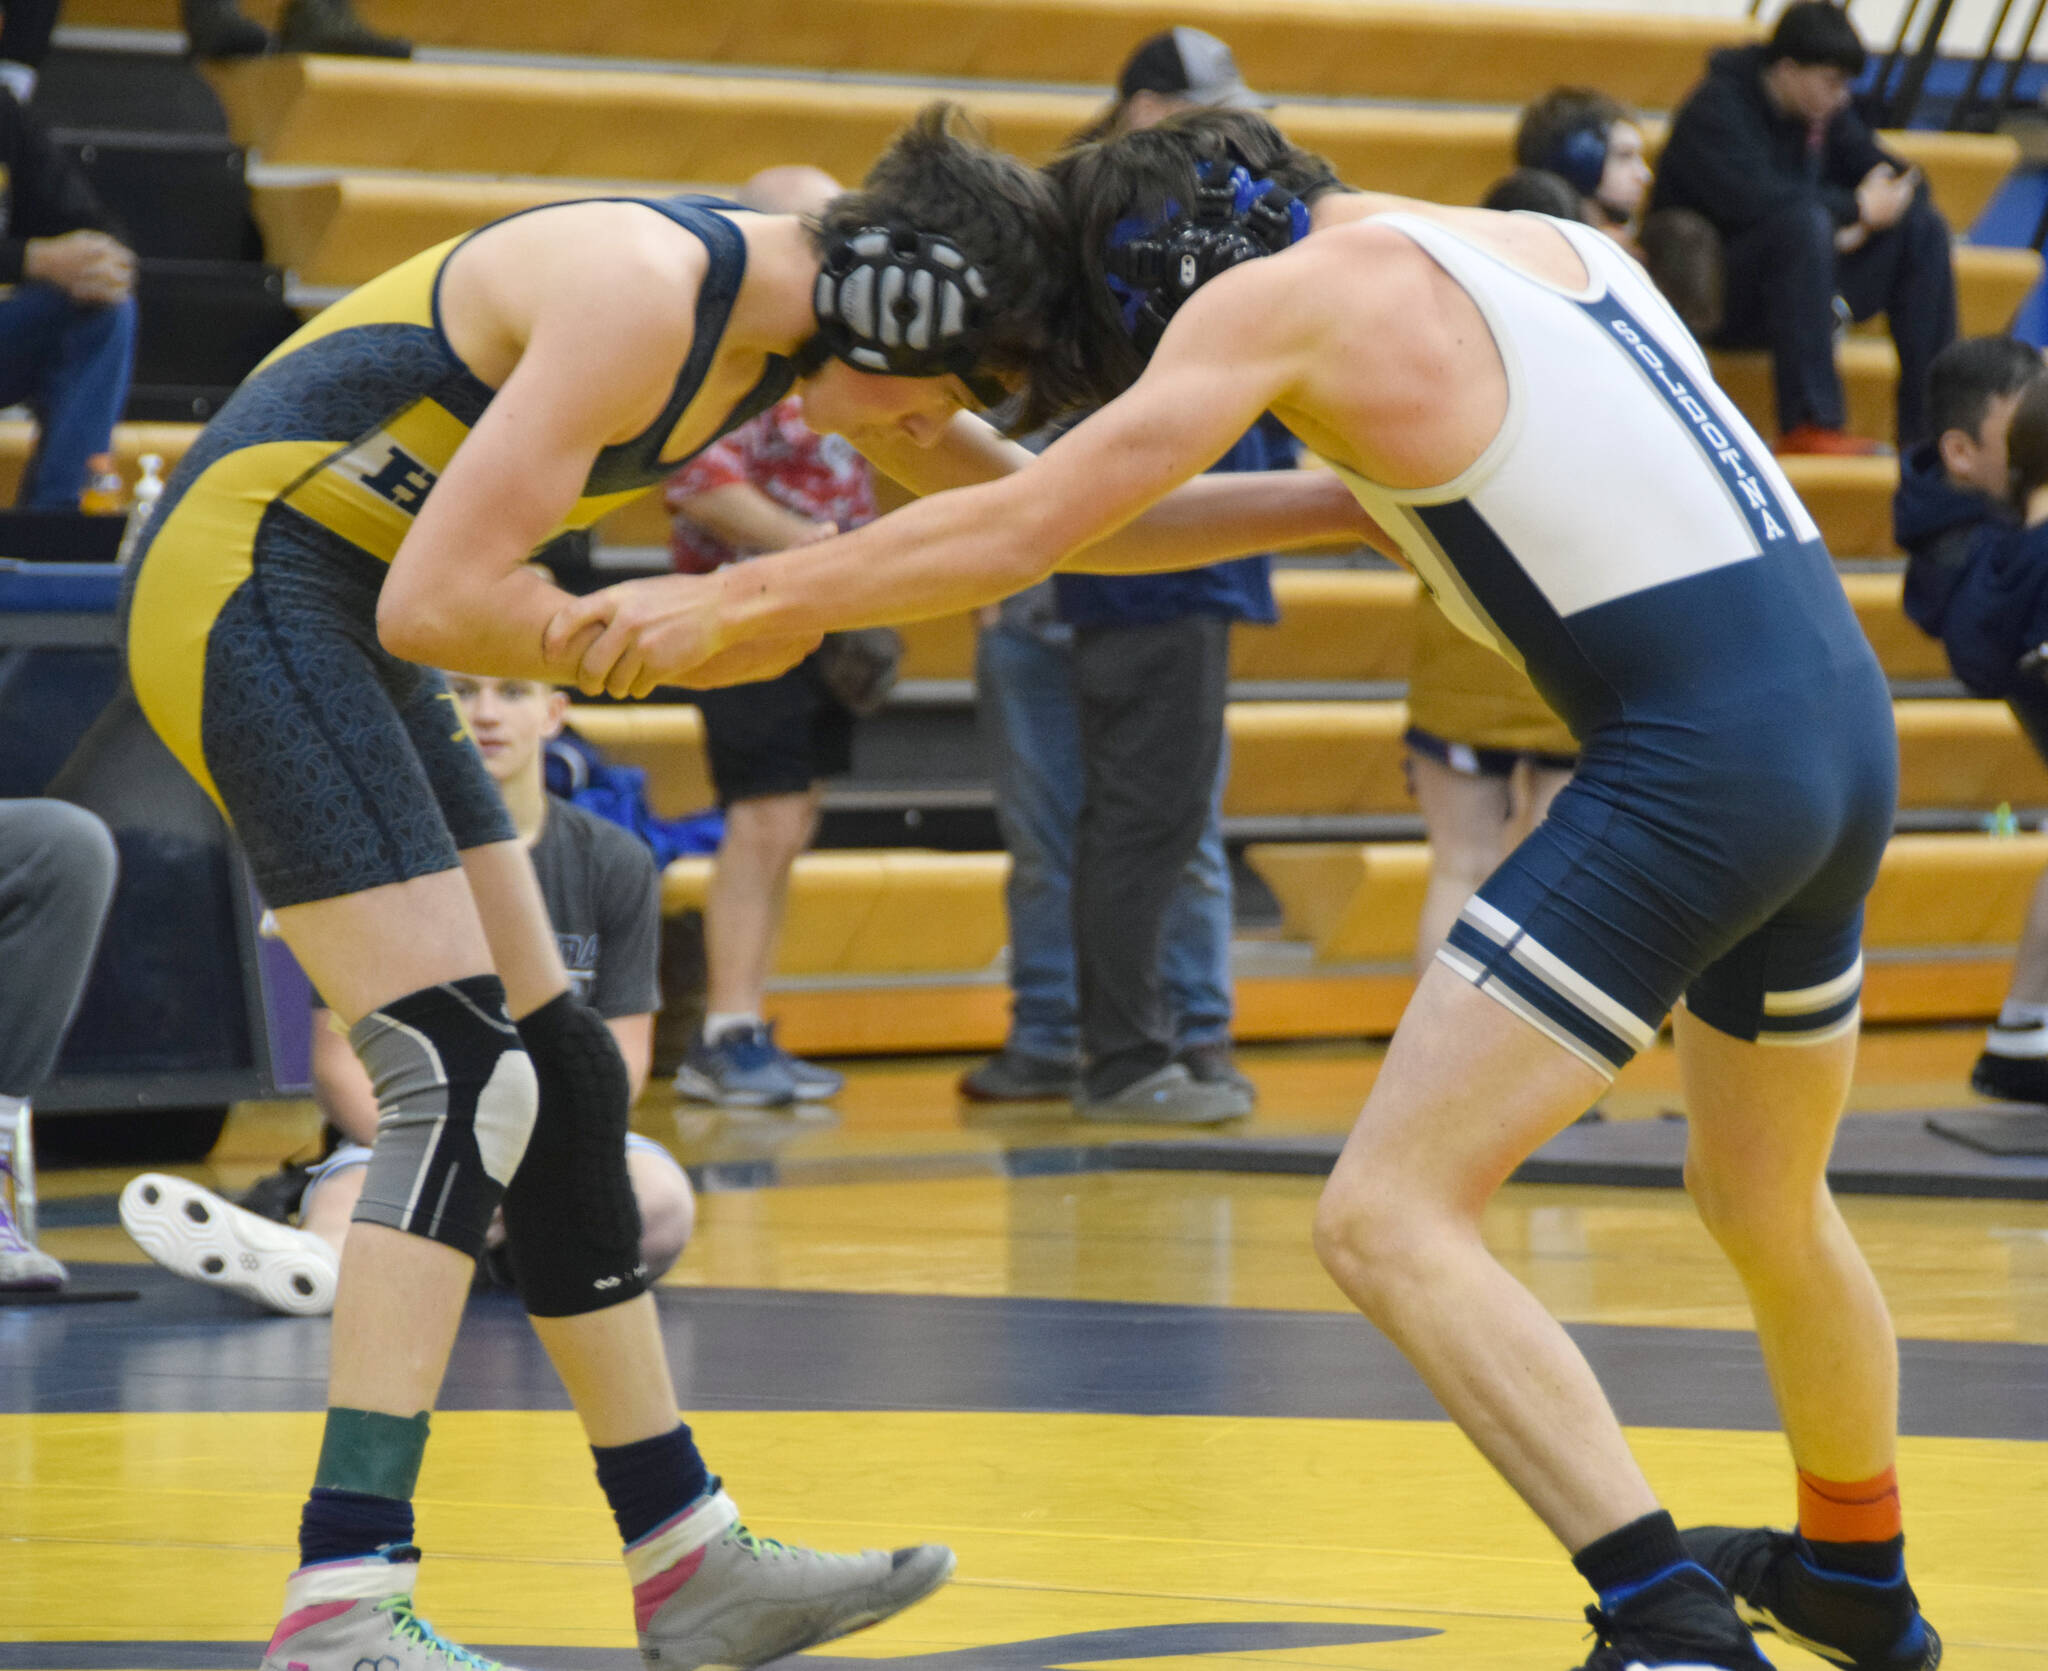 Homer’s Bryce Hagge competes against Soldotna’s Grady Abrams at 112 pounds at the Homer Round Robin Rumble on Saturday, Nov. 11, 2023, at Homer High School in Homer, Alaska. (Photo by Finn Heimbold/Homer News)